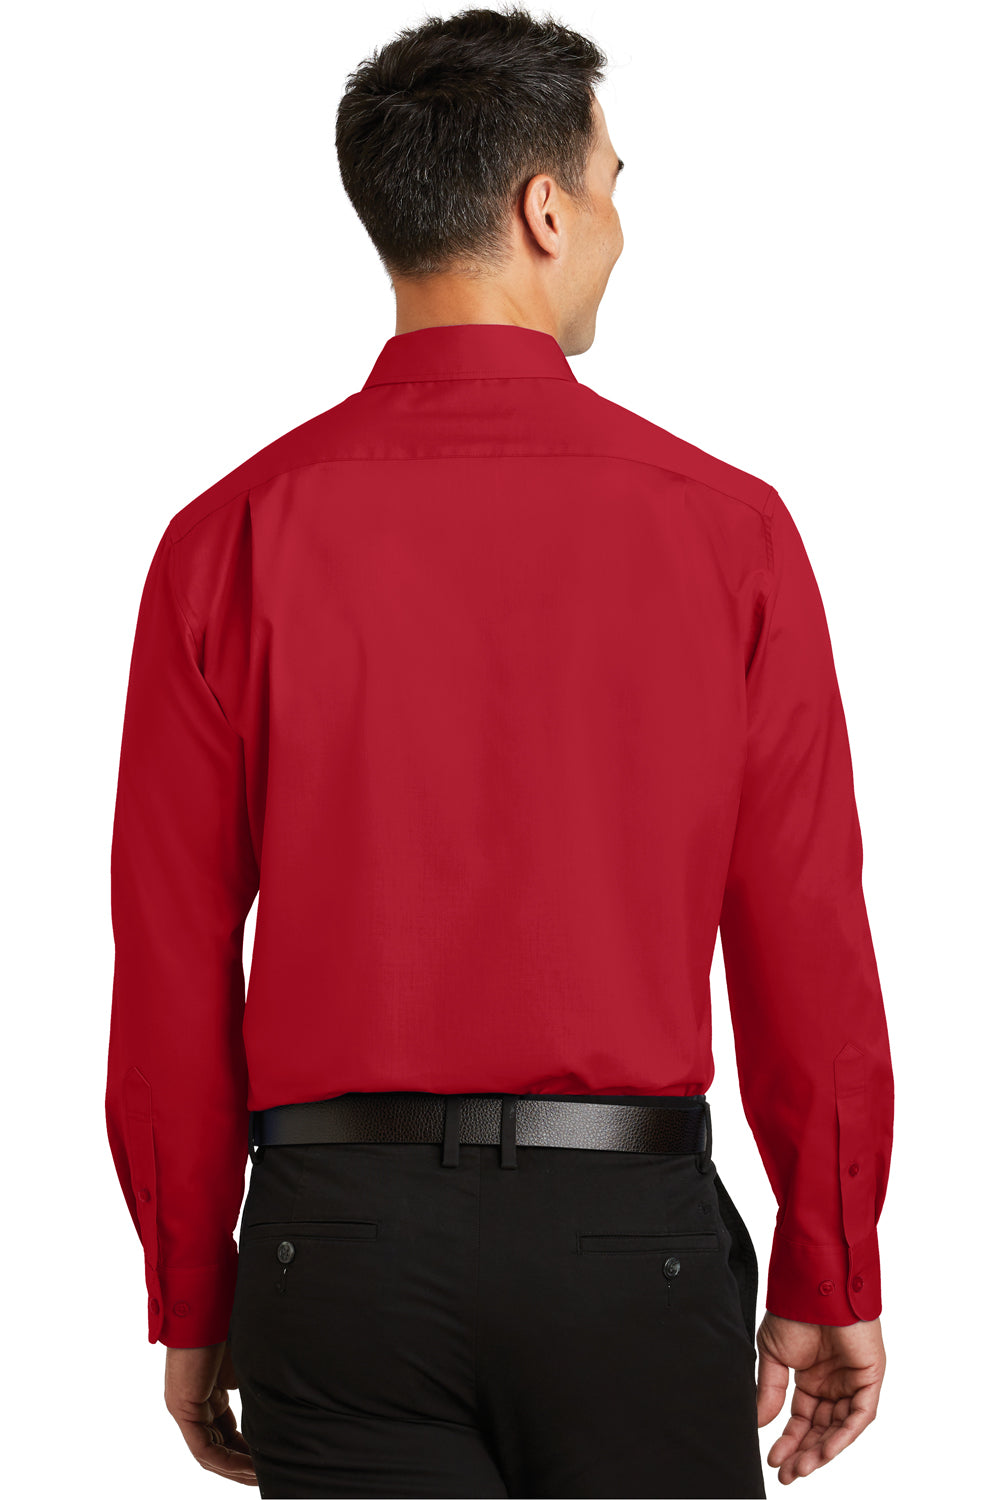 Port Authority S663 Mens SuperPro Wrinkle Resistant Long Sleeve Button Down Shirt w/ Pocket Red Back